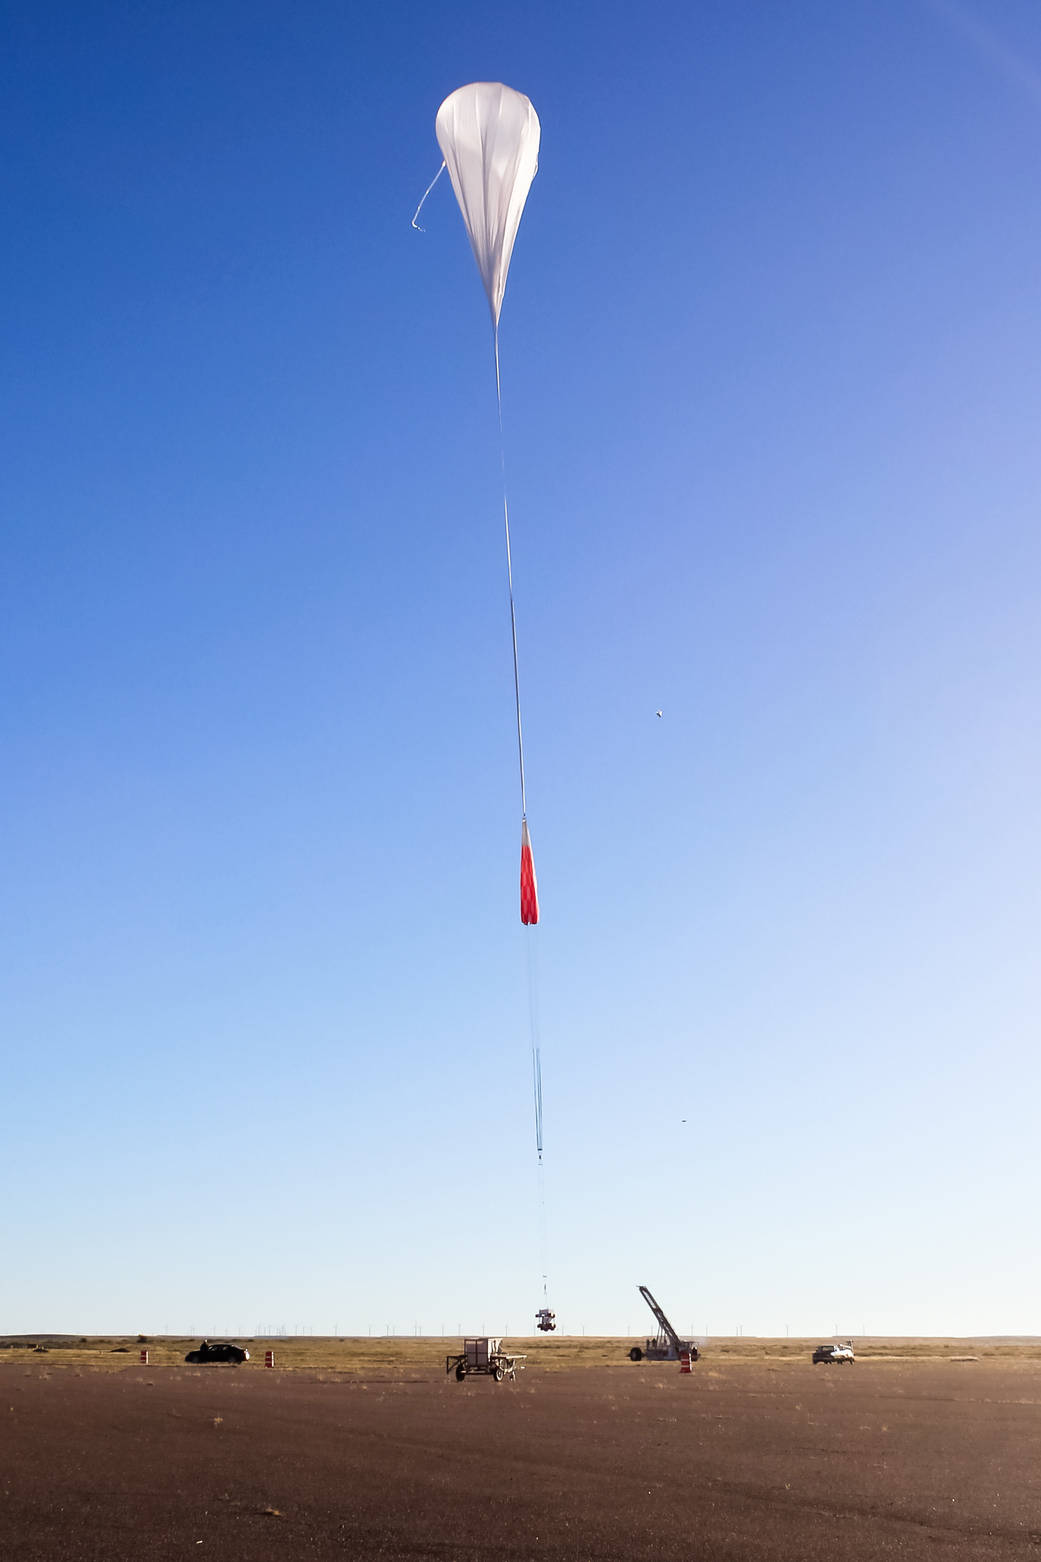 The HySICS and WASP instruments lift off from the Scientific Balloon Flight Facility in Fort Sumner, N.M.